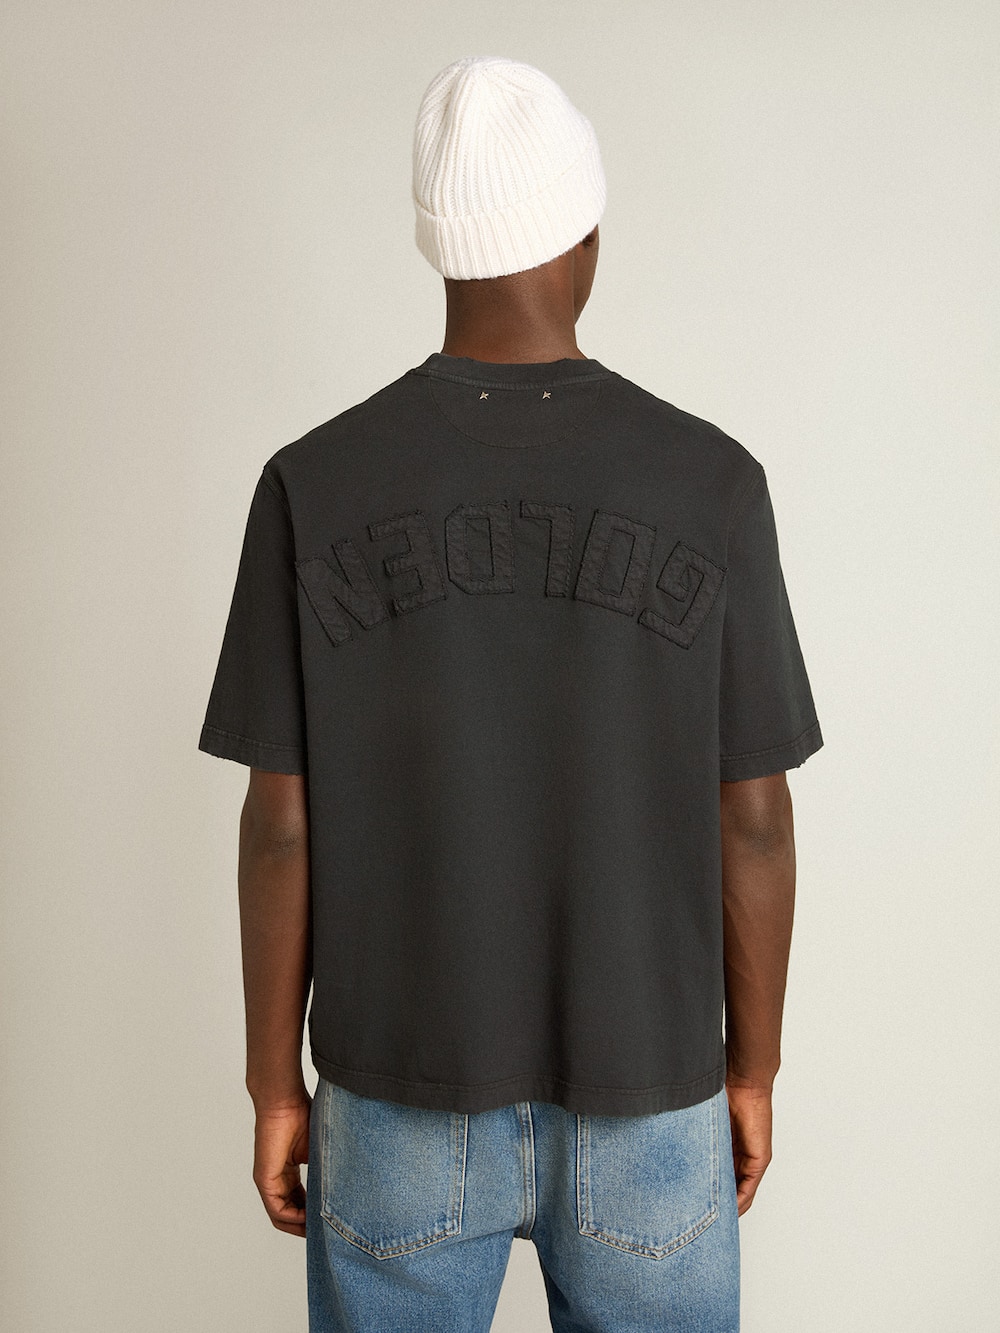 Golden Goose - T-shirt in washed black with reverse logo on the back - Asian fit in 